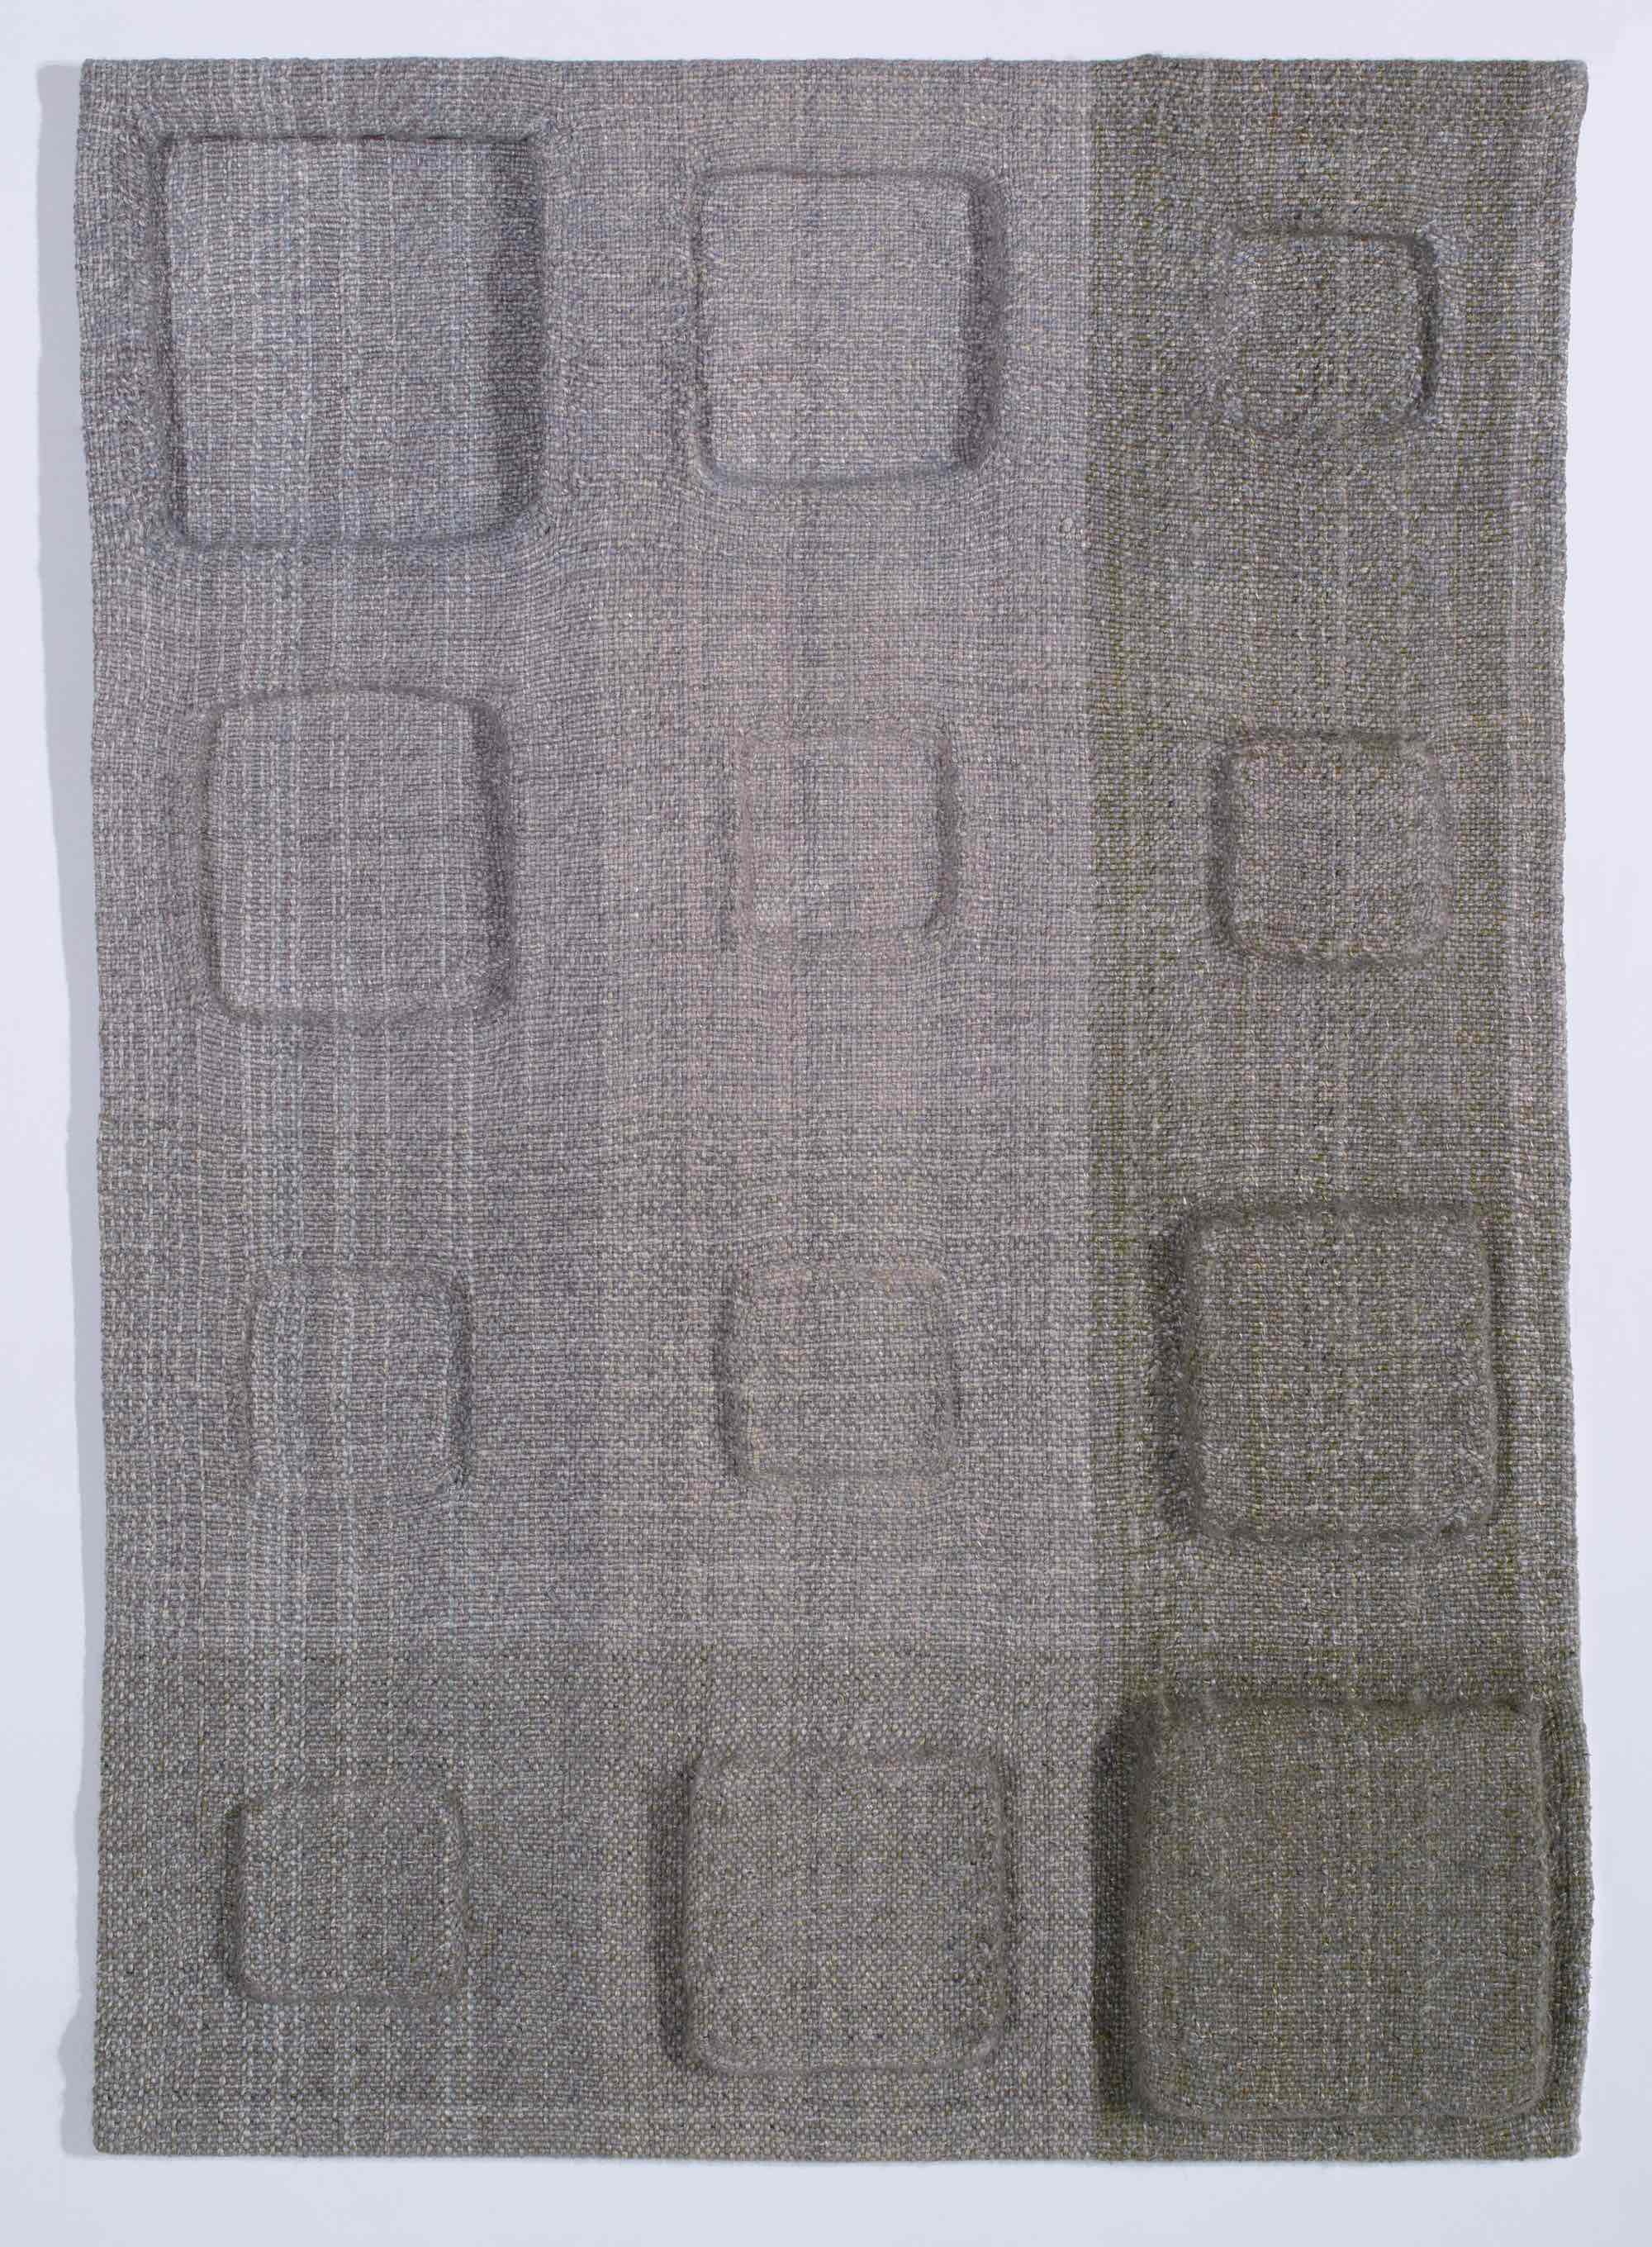   Squares In - Squares Out    Wool, linen, silk    22” x 31”  